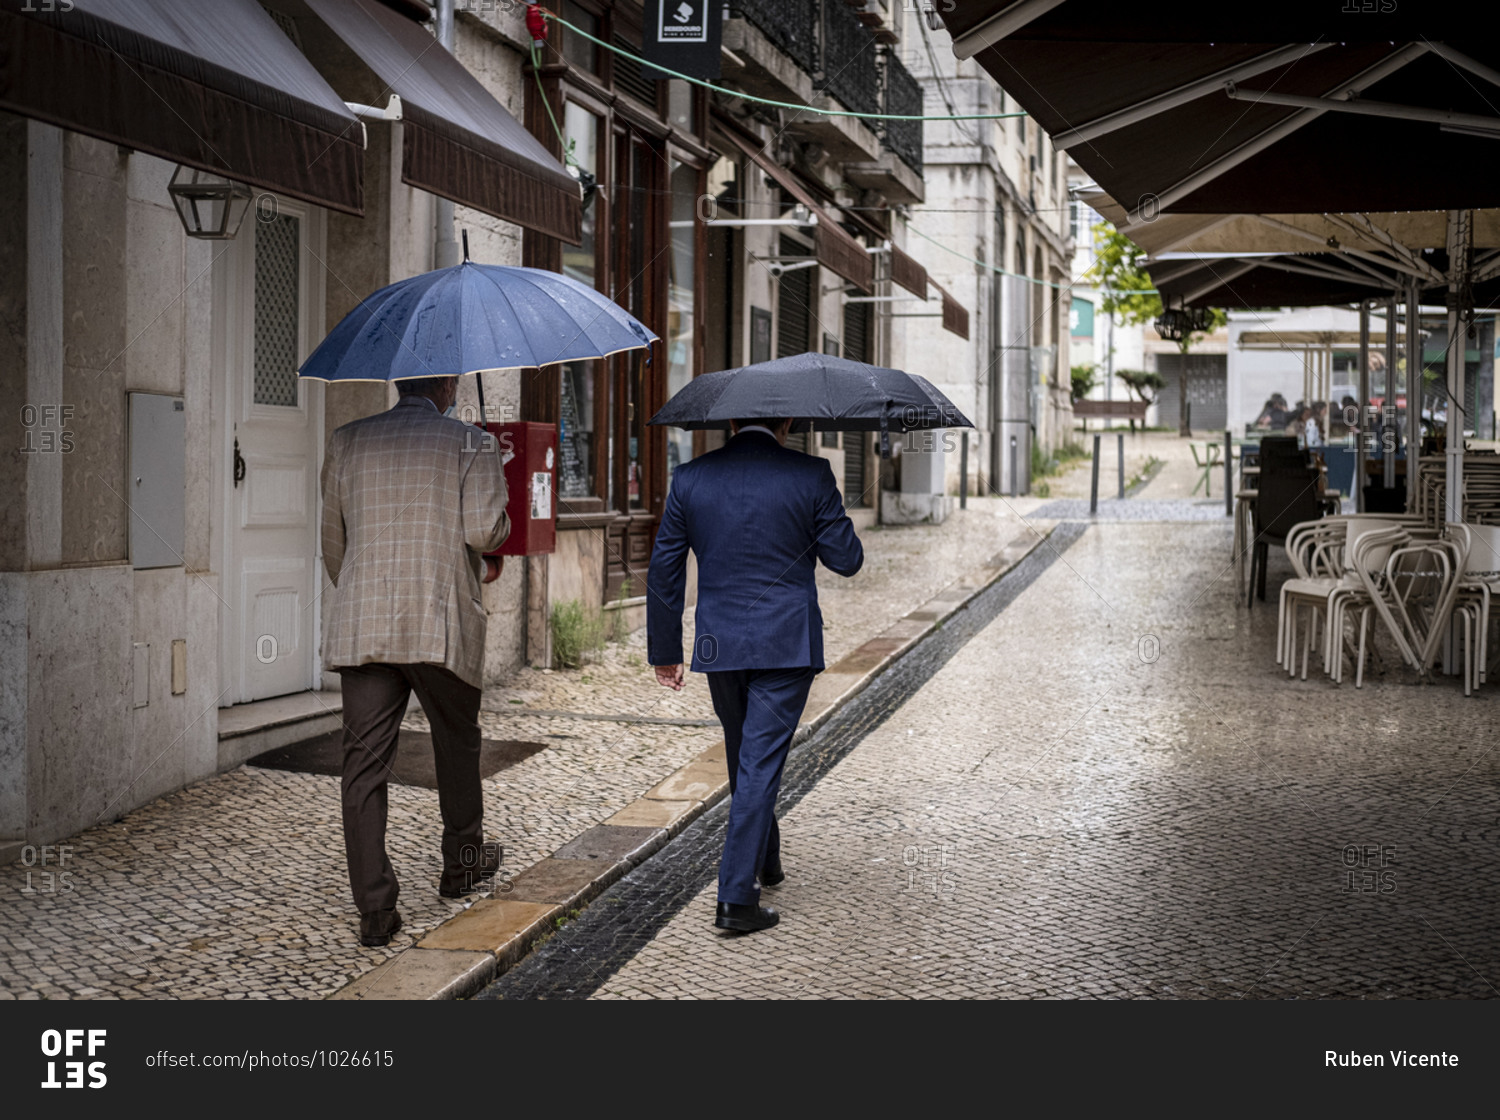 Lisbon, Portugal - June 11, 2020 : Two men in suits and carrying umbrellas walking in downtown Lisbon